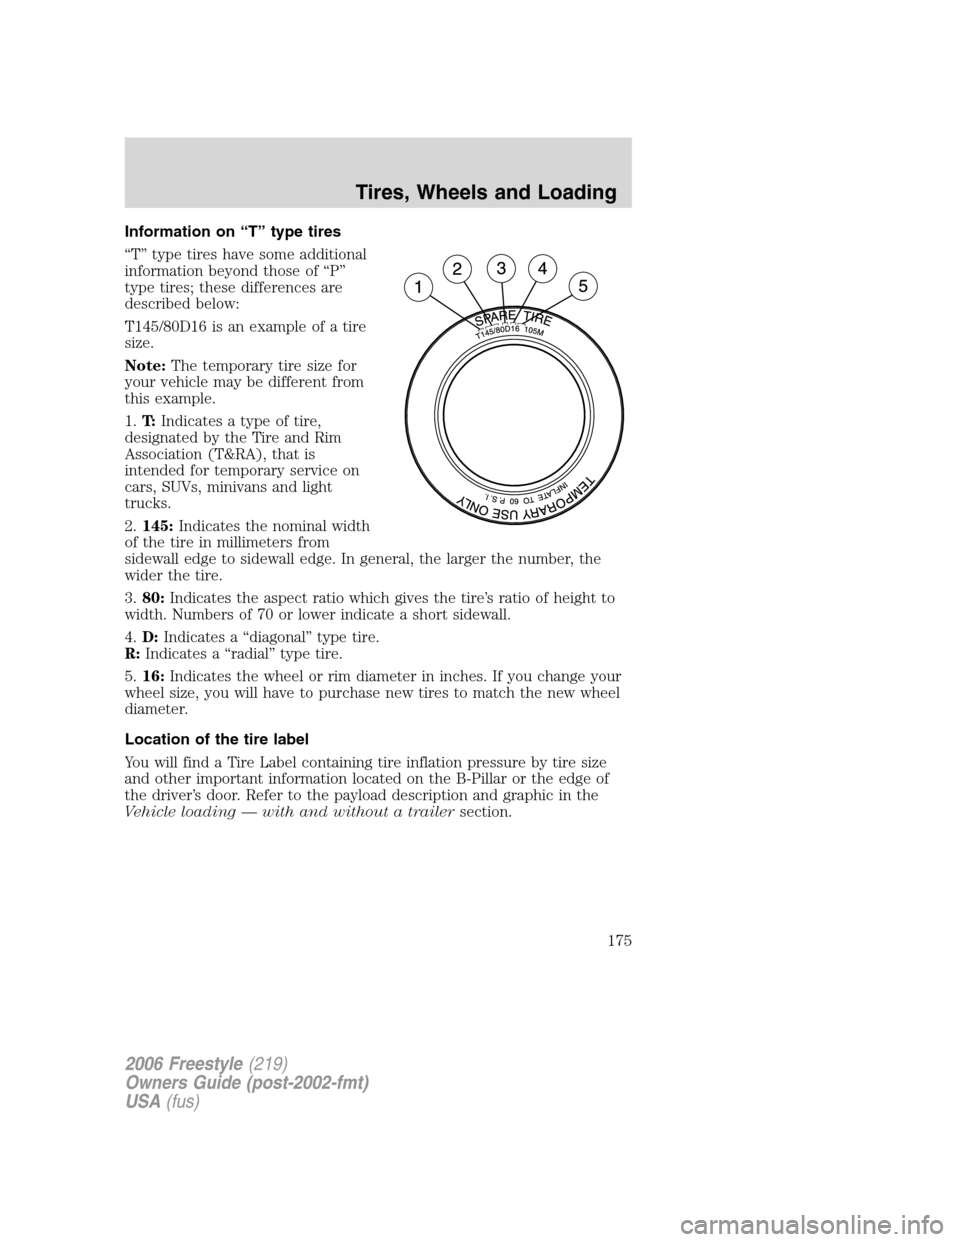 FORD FREESTYLE 2006 1.G Owners Manual Information on “T” type tires
“T” type tires have some additional
information beyond those of “P”
type tires; these differences are
described below:
T145/80D16 is an example of a tire
size